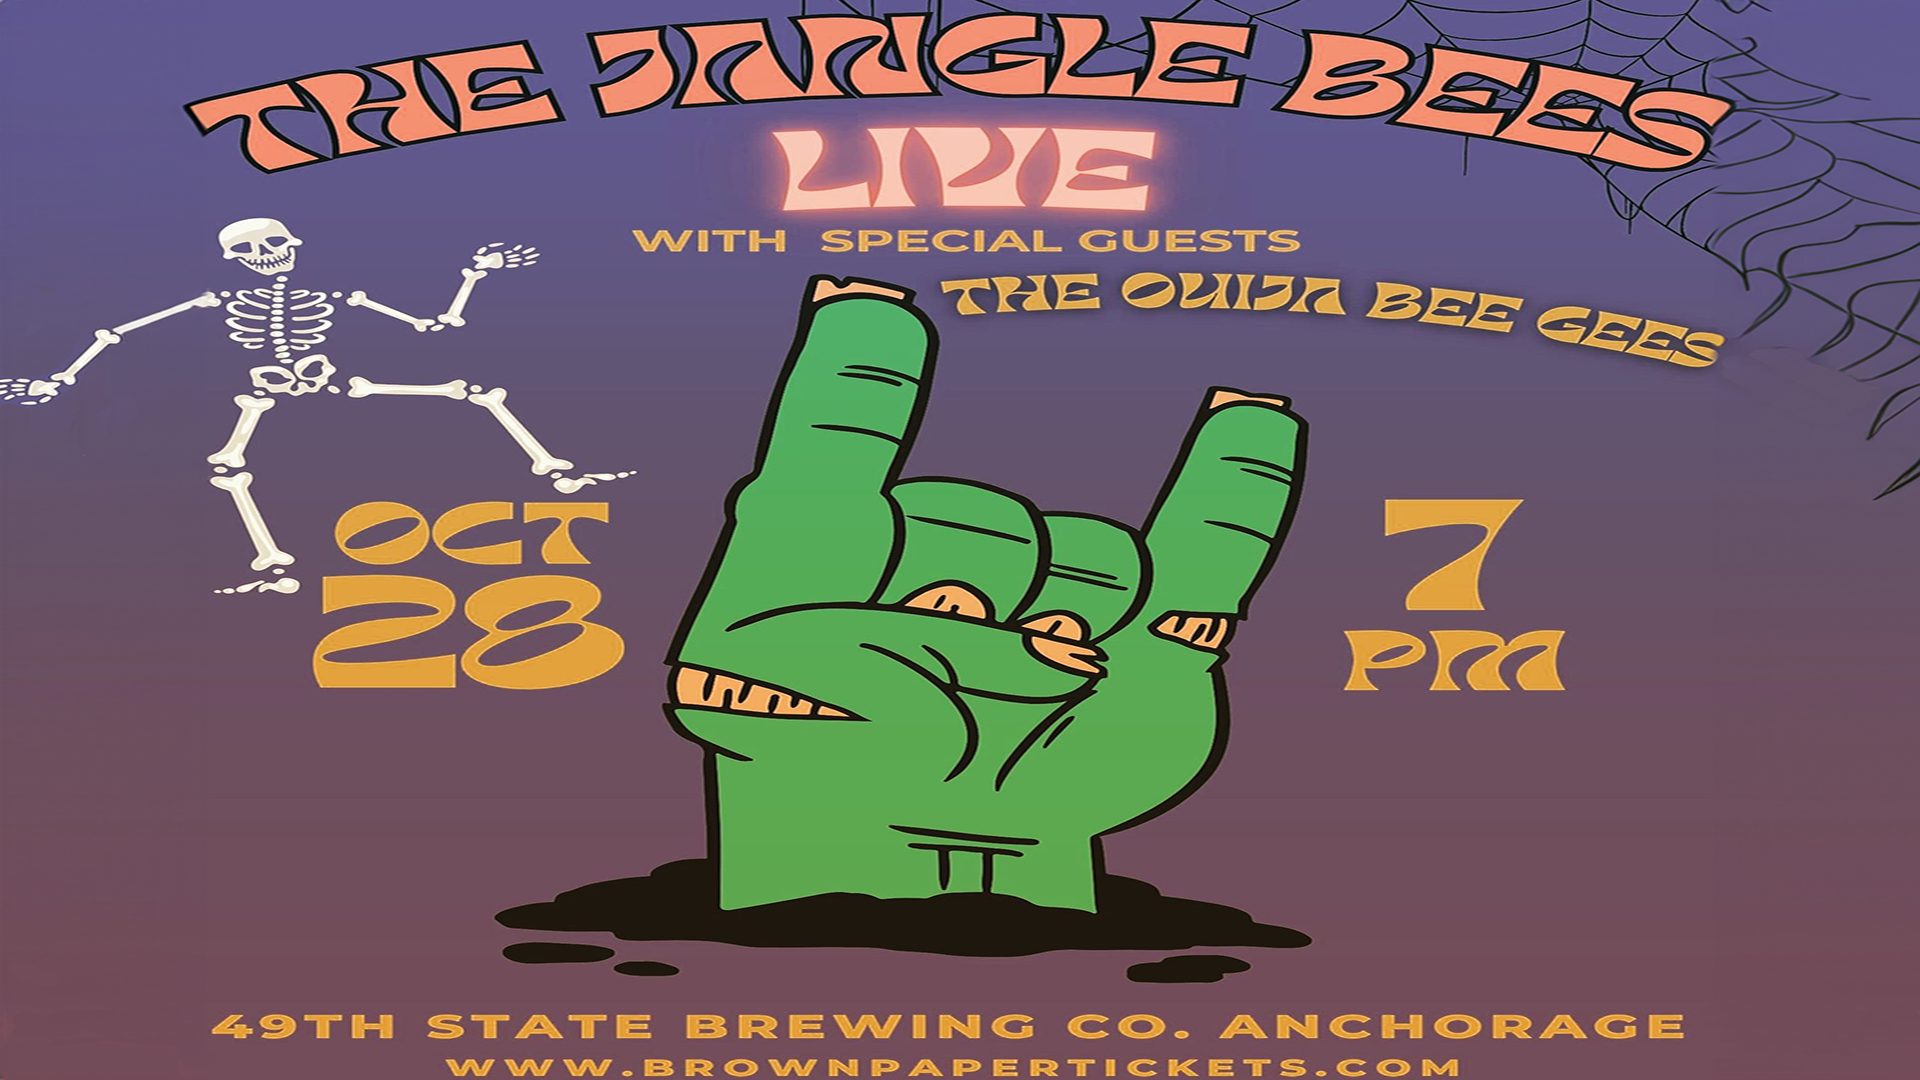 Jangle Bees, Halloween, 49th State Brewing